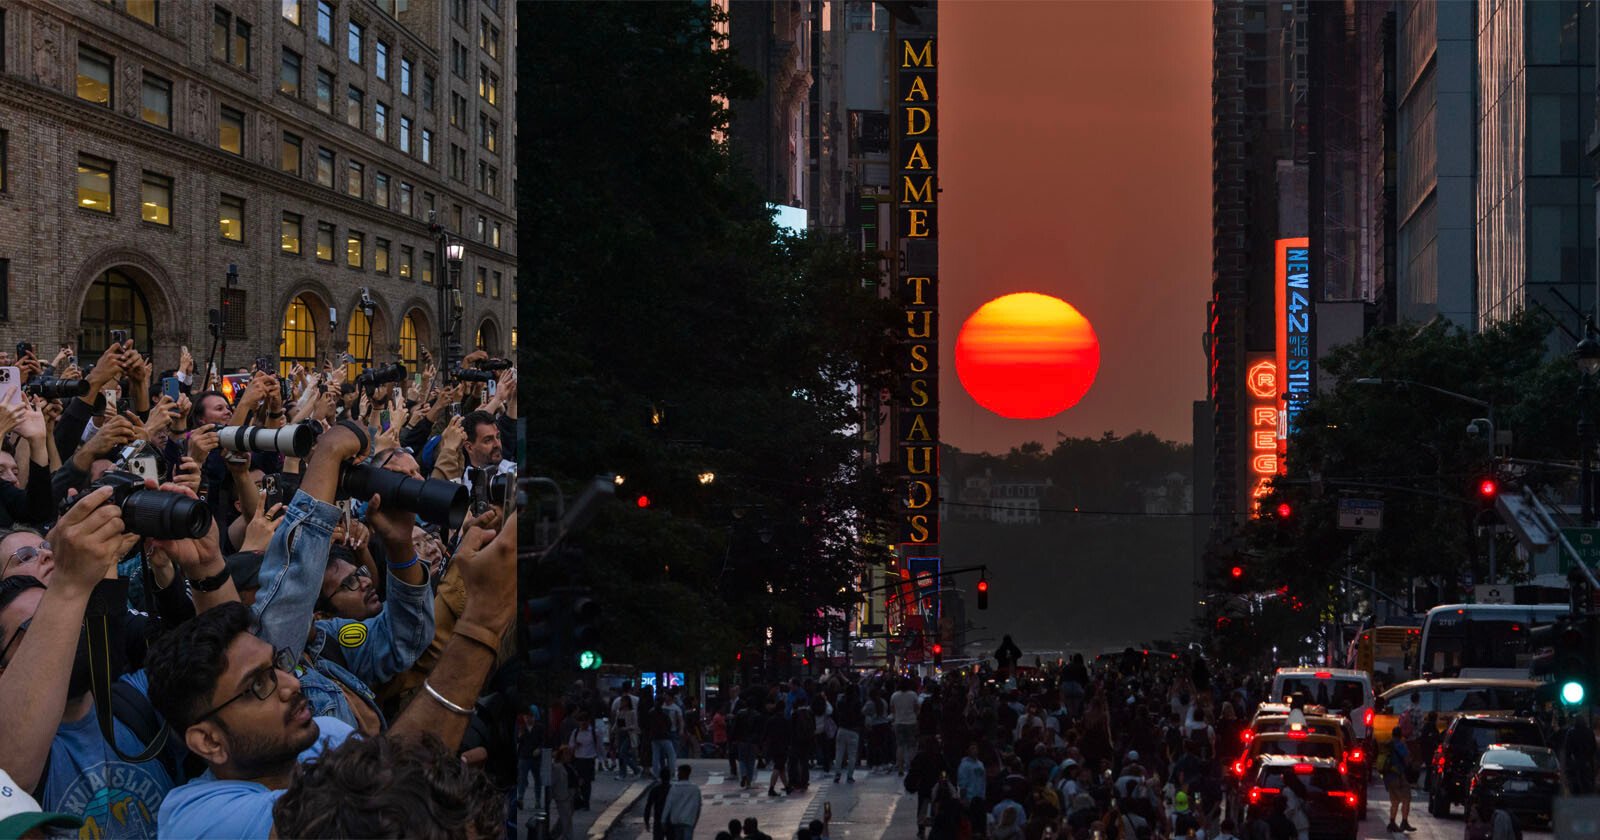 Thousands of Photographers Gather in New York for Manhattanhenge